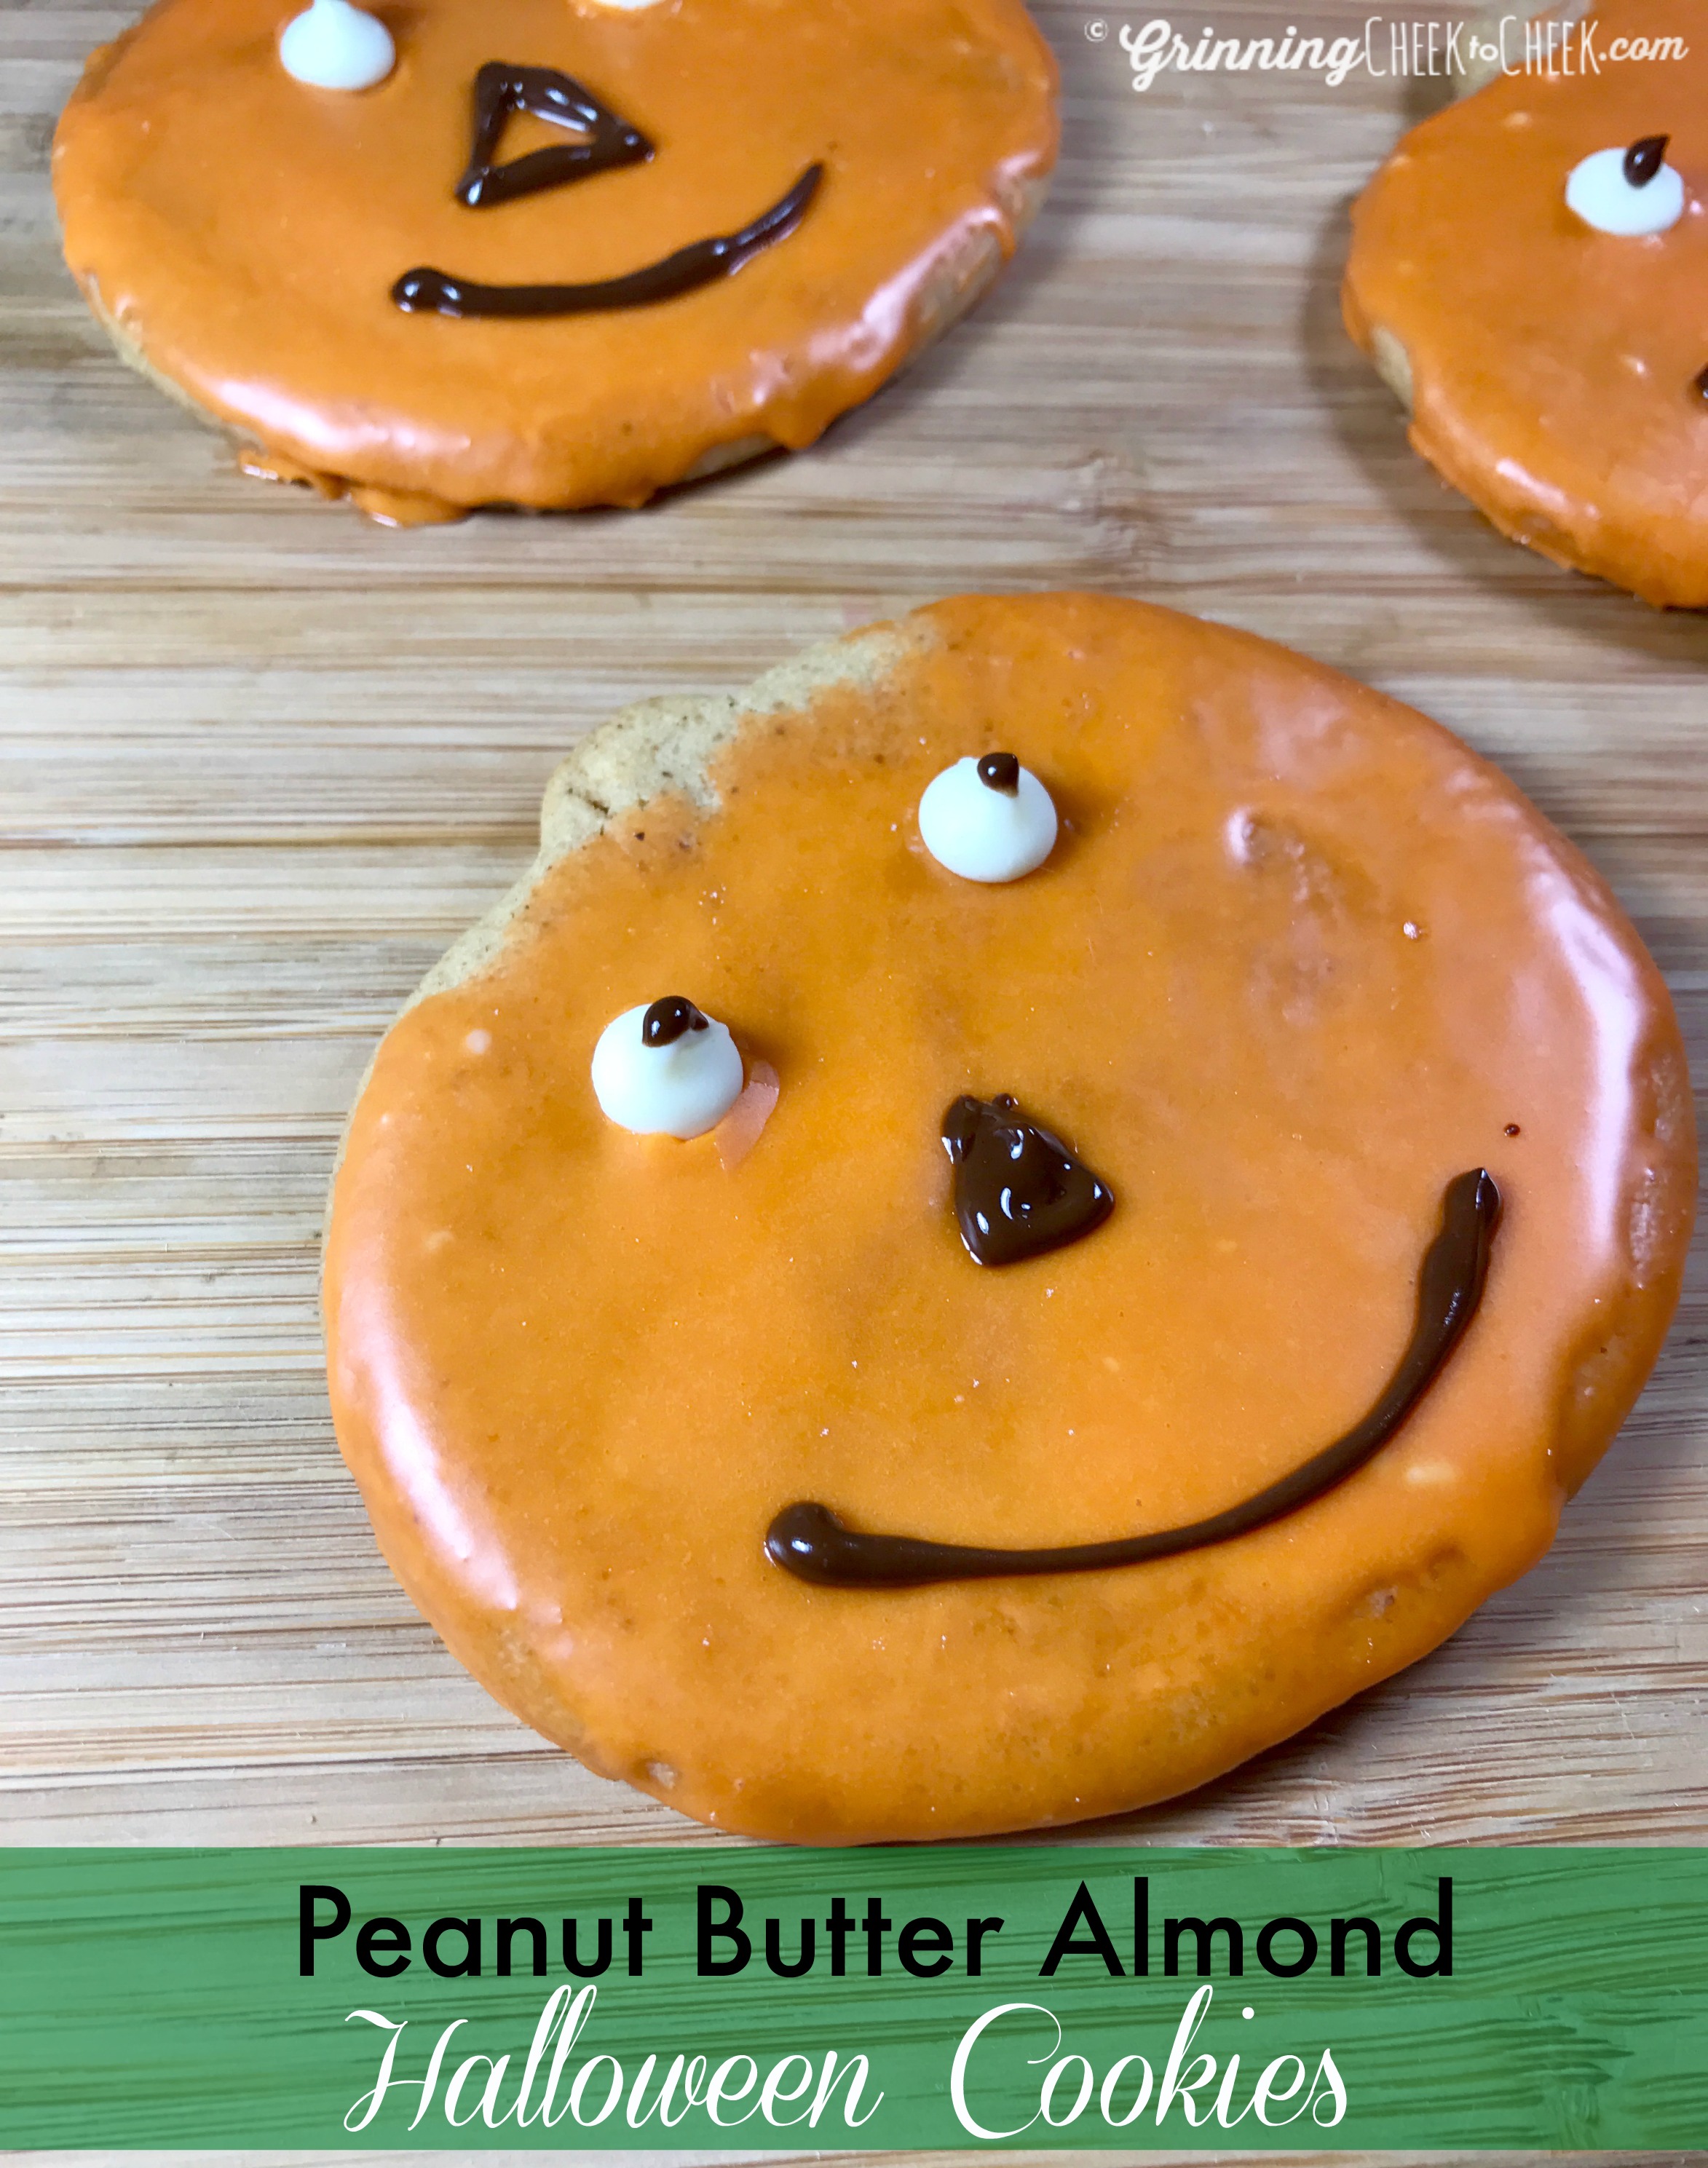 Peanut Butter Almond Halloween Cookies- #Justin’s #ad #Giveaway